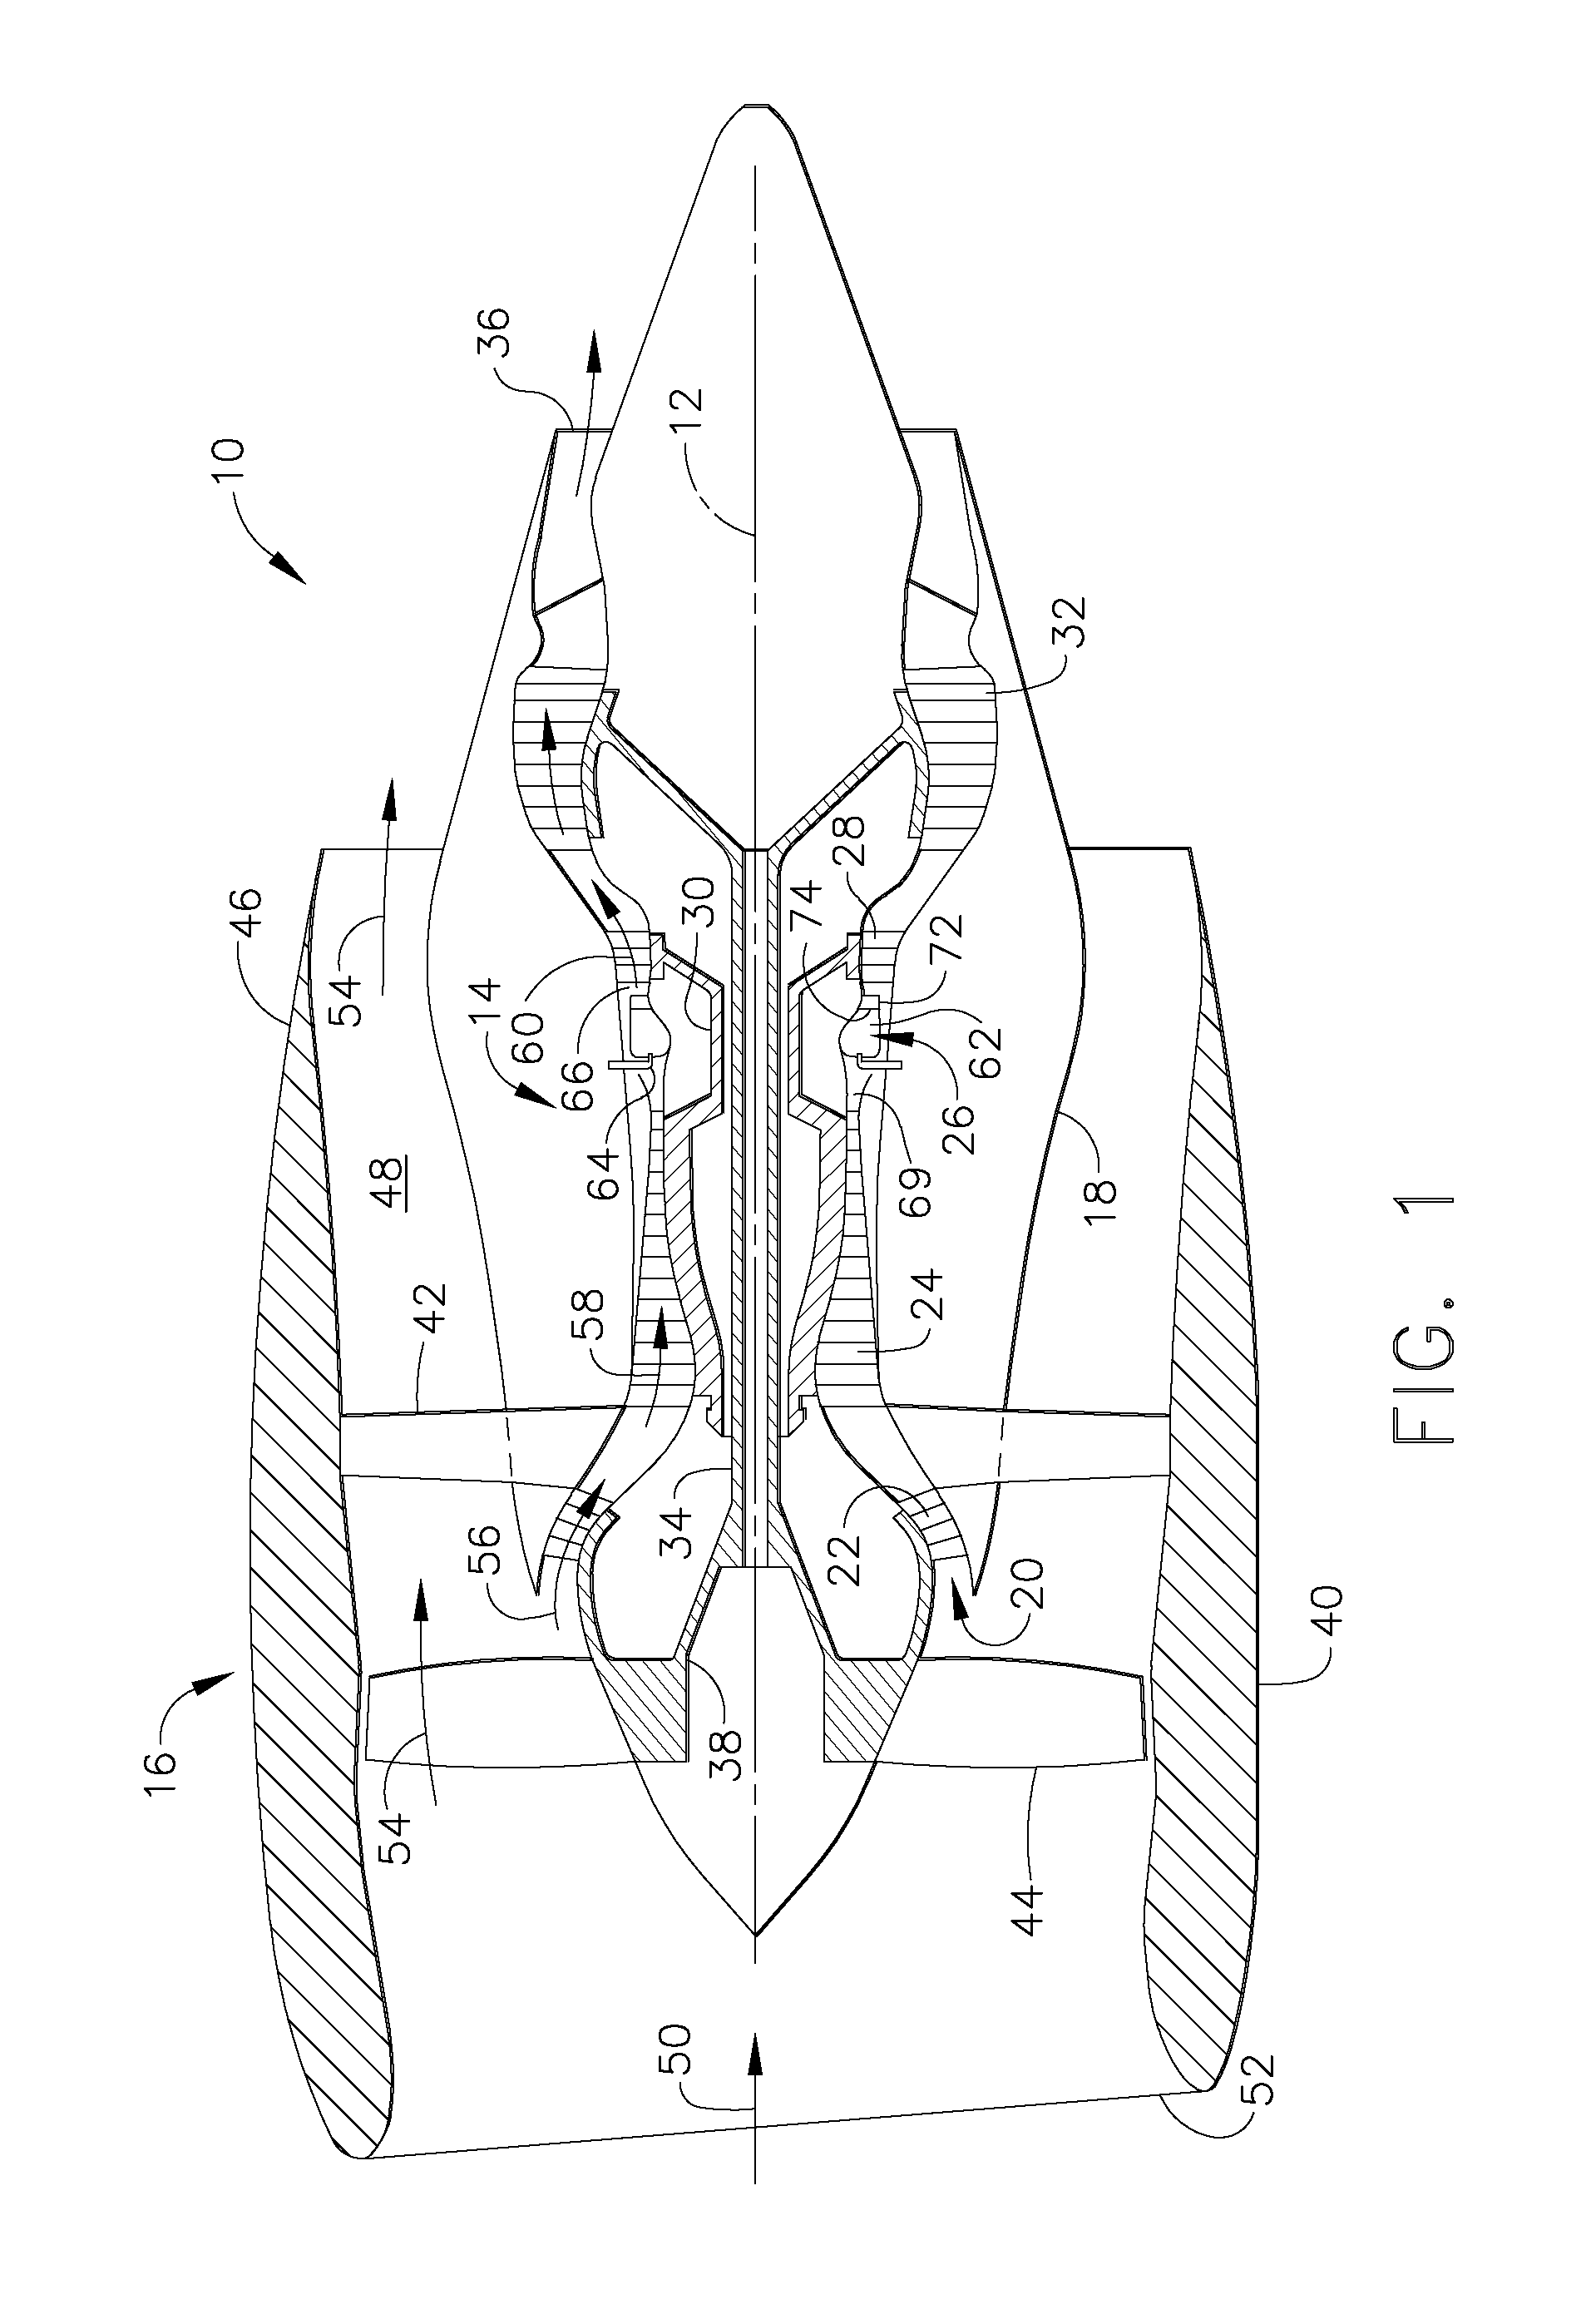 Method of manufacturing a unitary conduit for transporting fluids